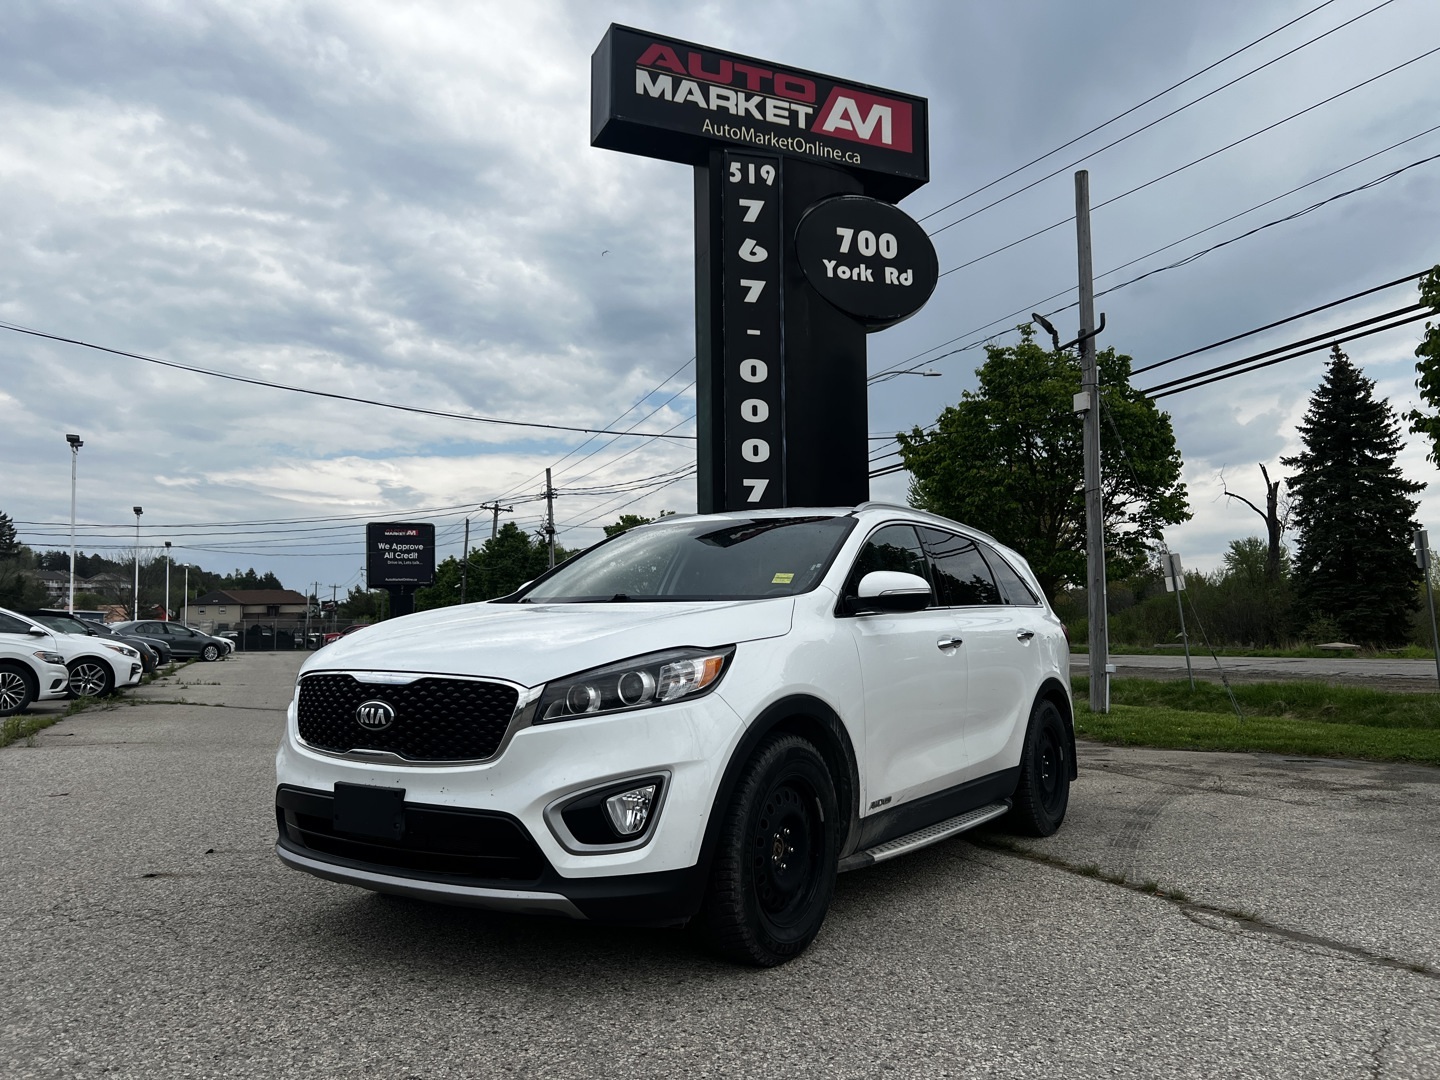 2018 Kia Sorento EX SOLD AS IS – NOT INSPECTED